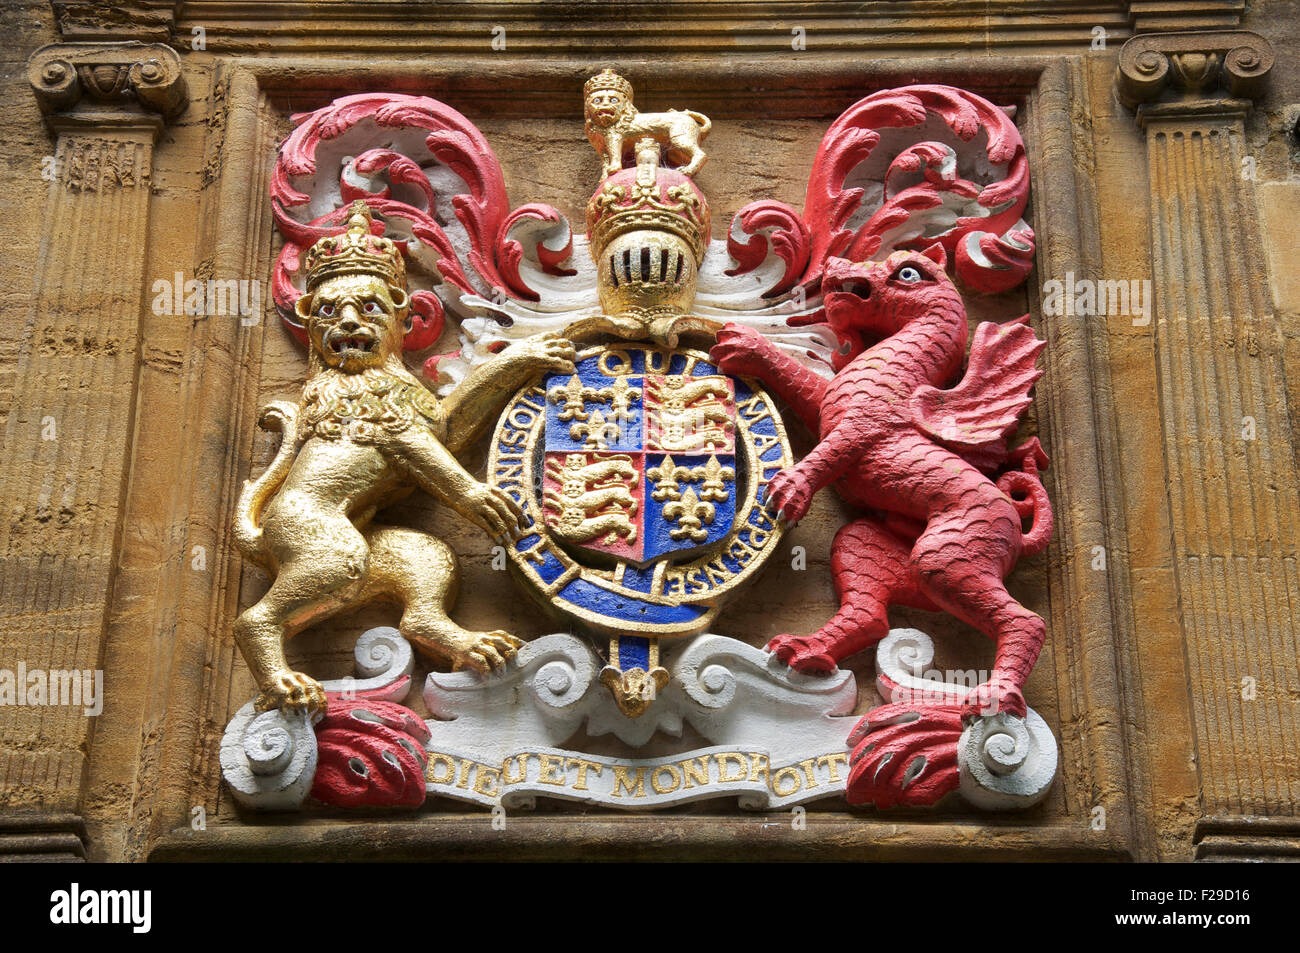 The Royal Coat of Arms of King Edward 6th in the grounds of Sherborne School, which was re-founded in his reign. Dorset, England, United Kingdom. Stock Photo